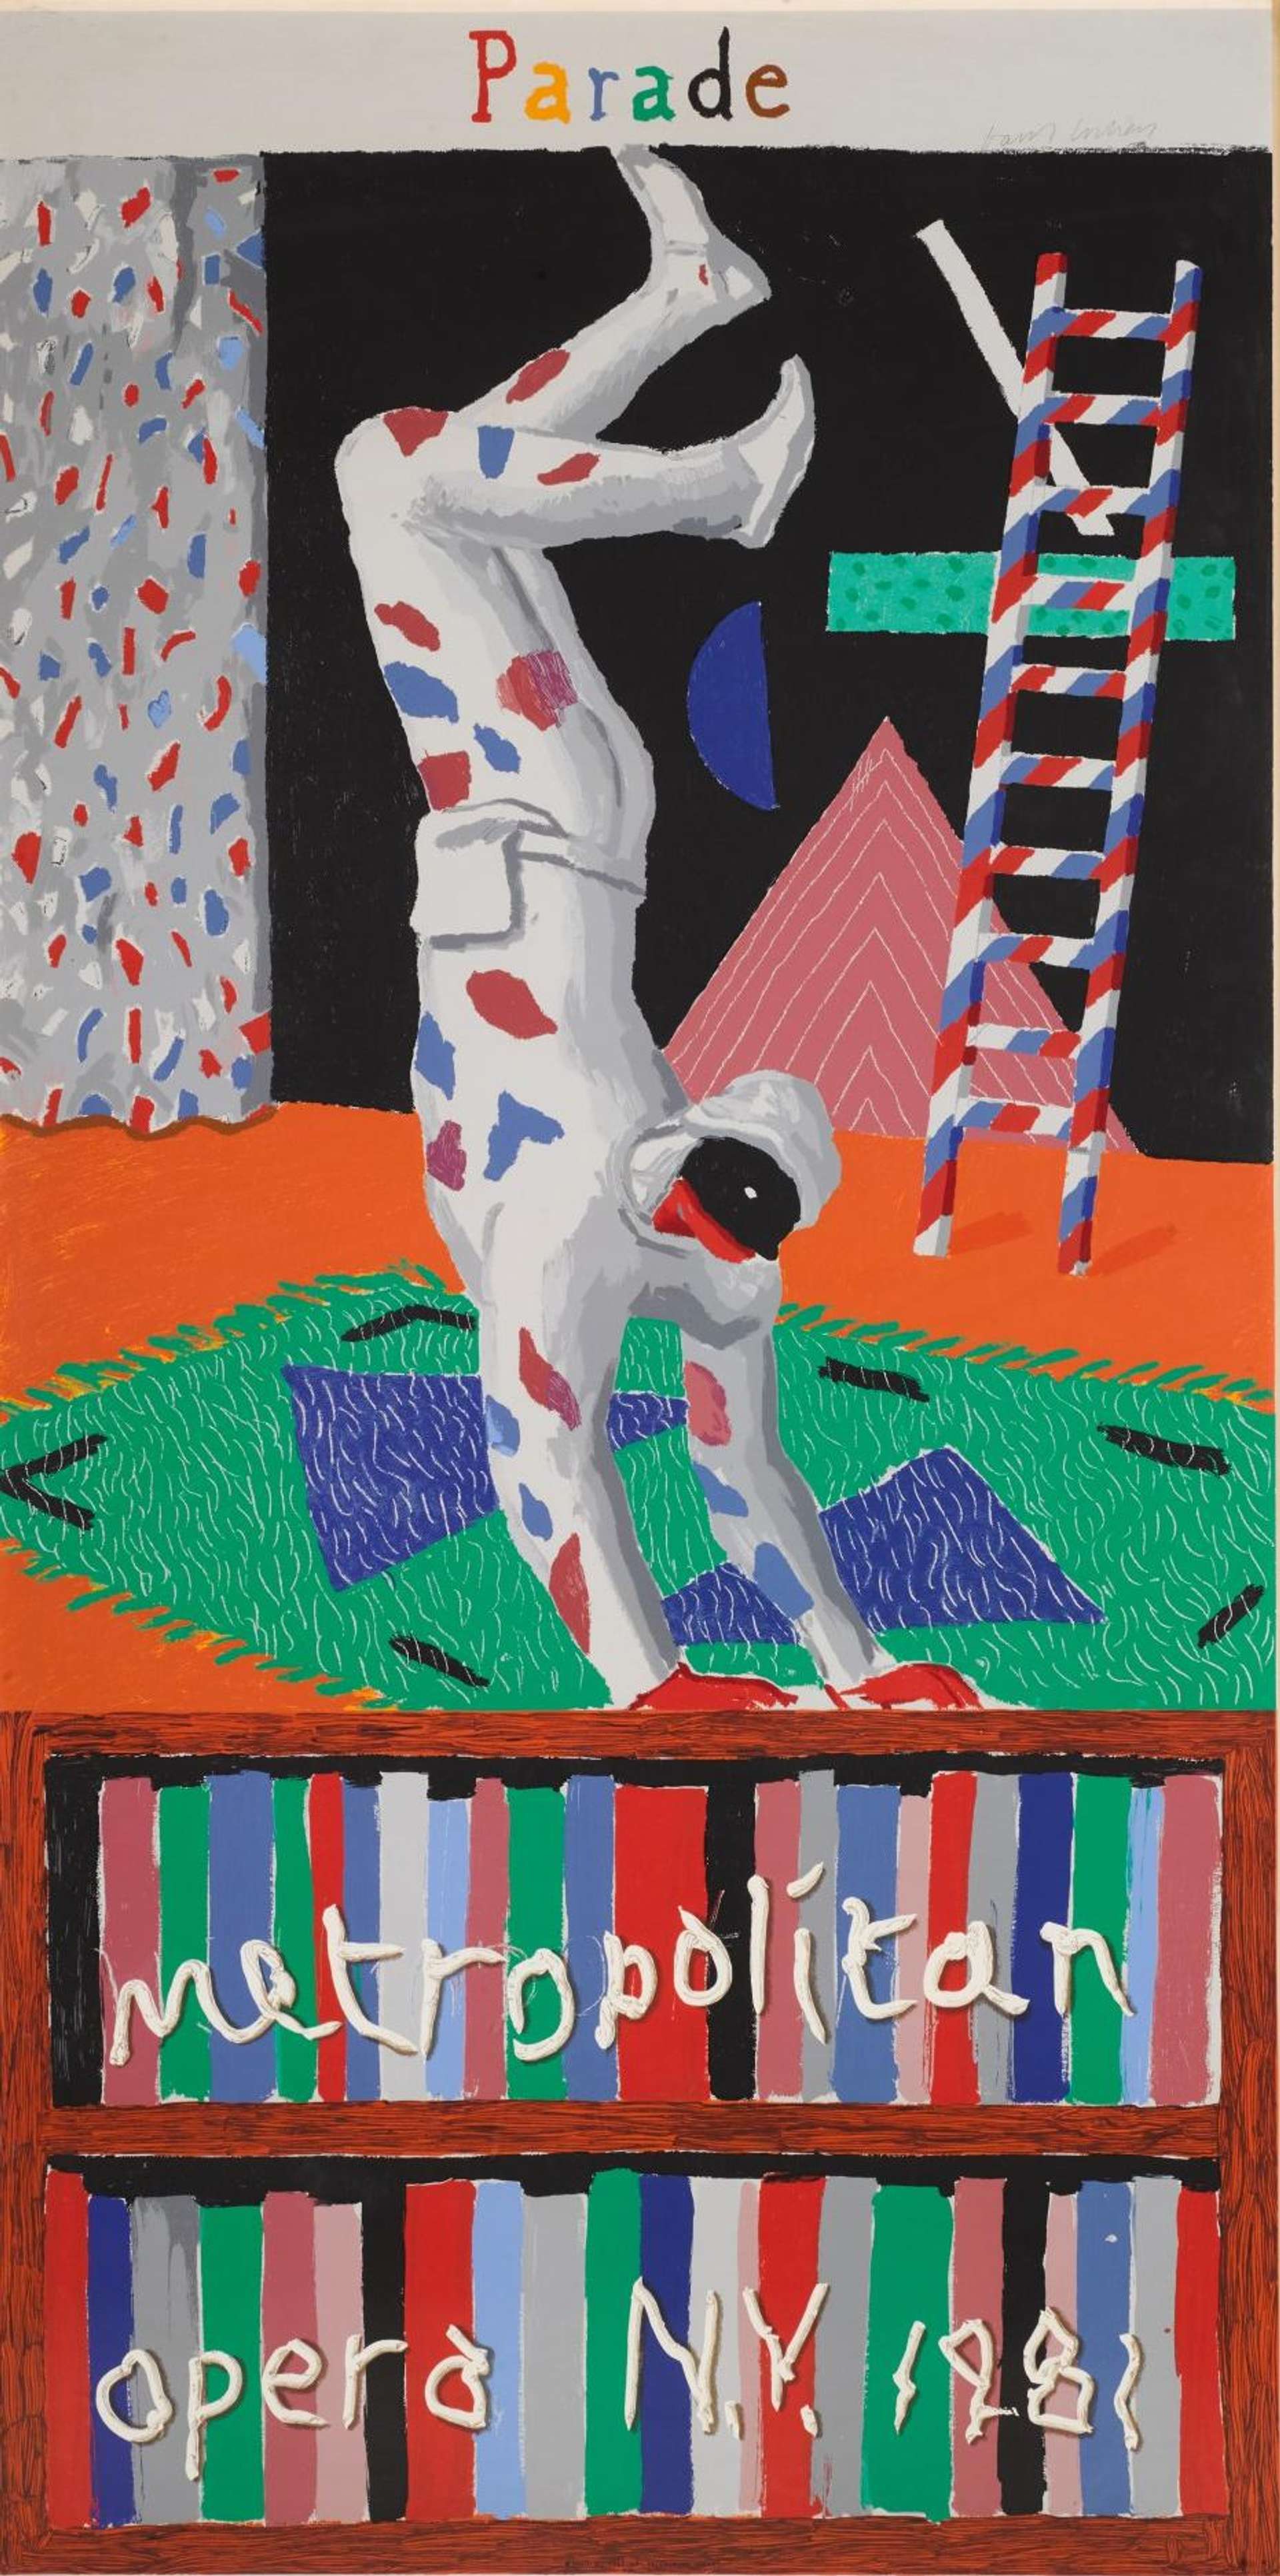 This print by Hockney shows a harlequin in a white leotard doing a handstand on a green carpet with blue triangles. In the background, geometric shapes and a ladder can be seen.